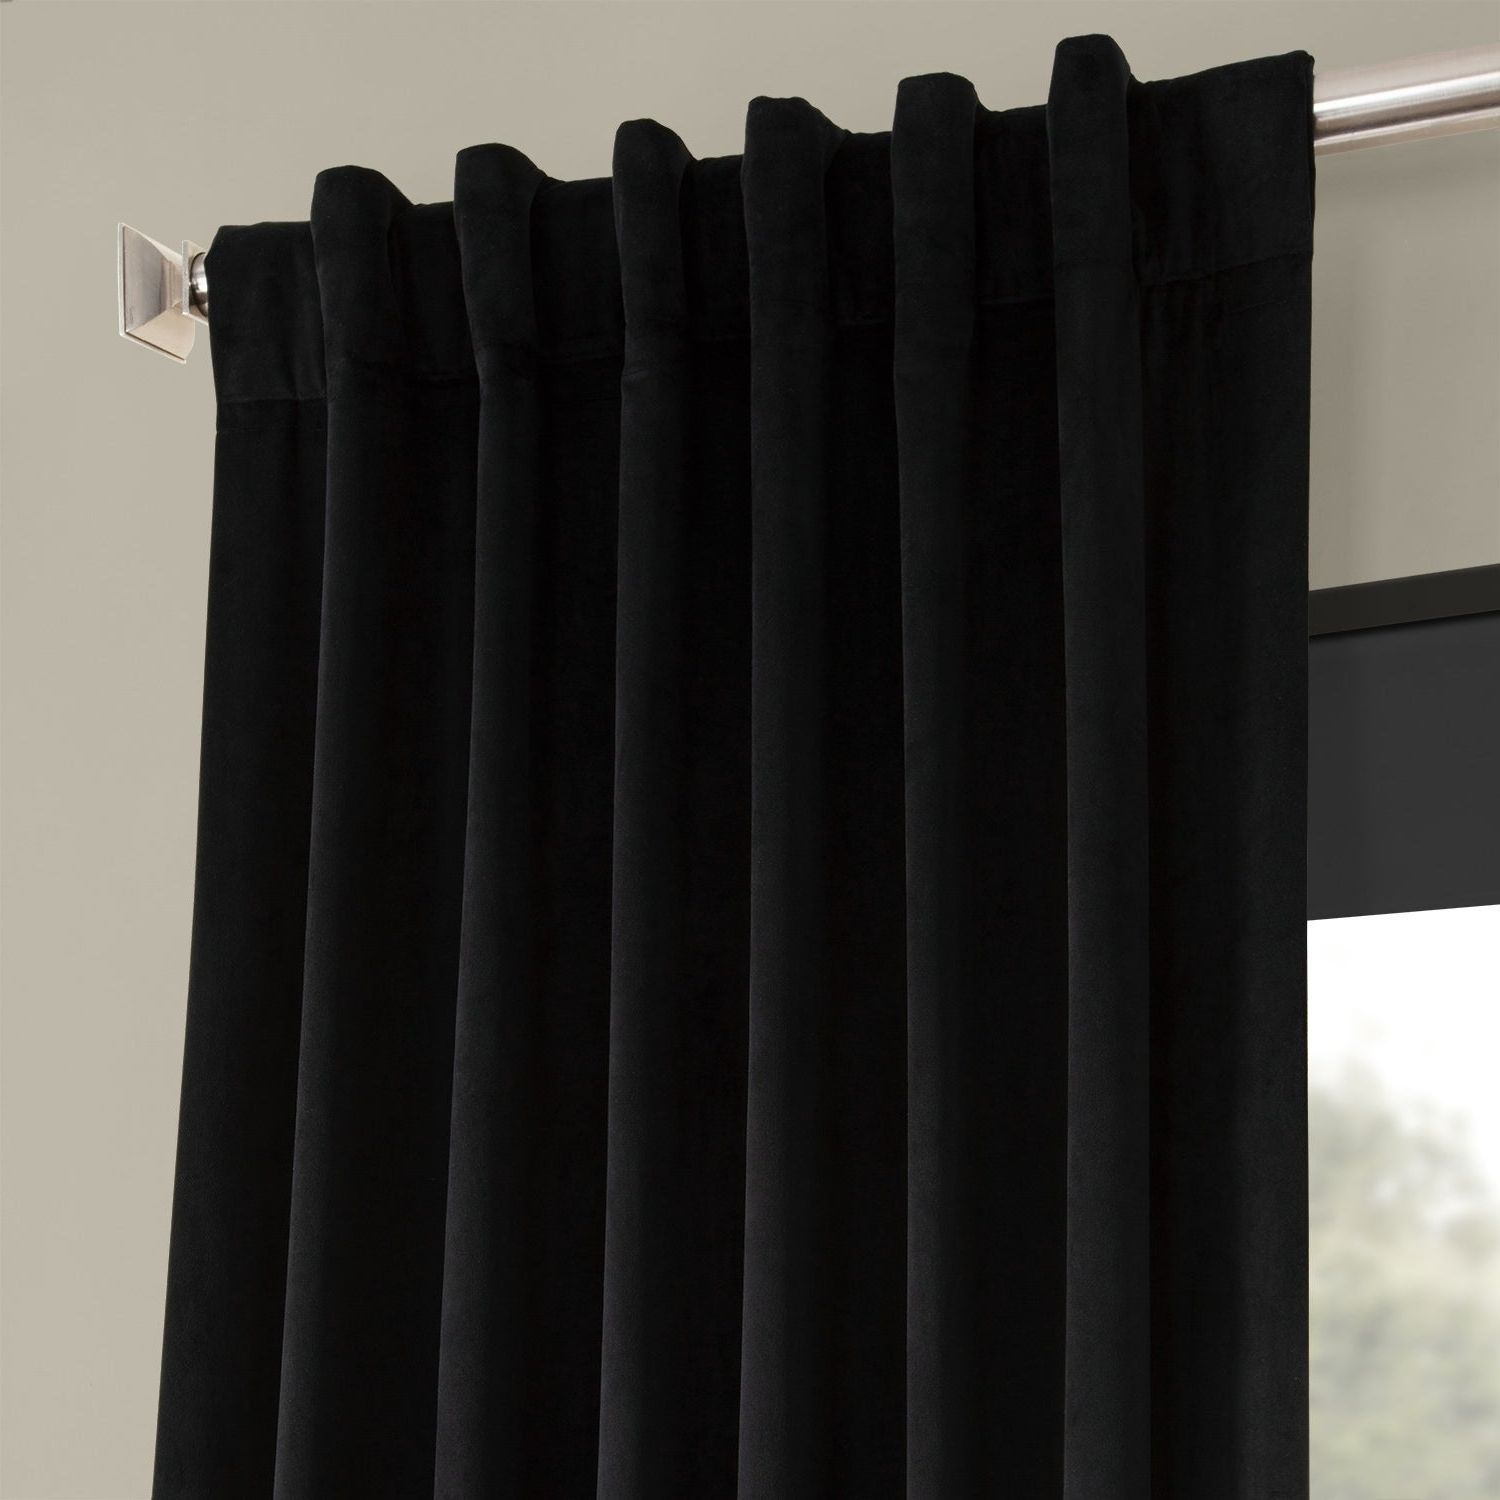 Exclusive Fabrics Signature Warm Black Velvet Single Blackout Curtain Panel Inside Well Known Warm Black Velvet Single Blackout Curtain Panels (View 3 of 20)